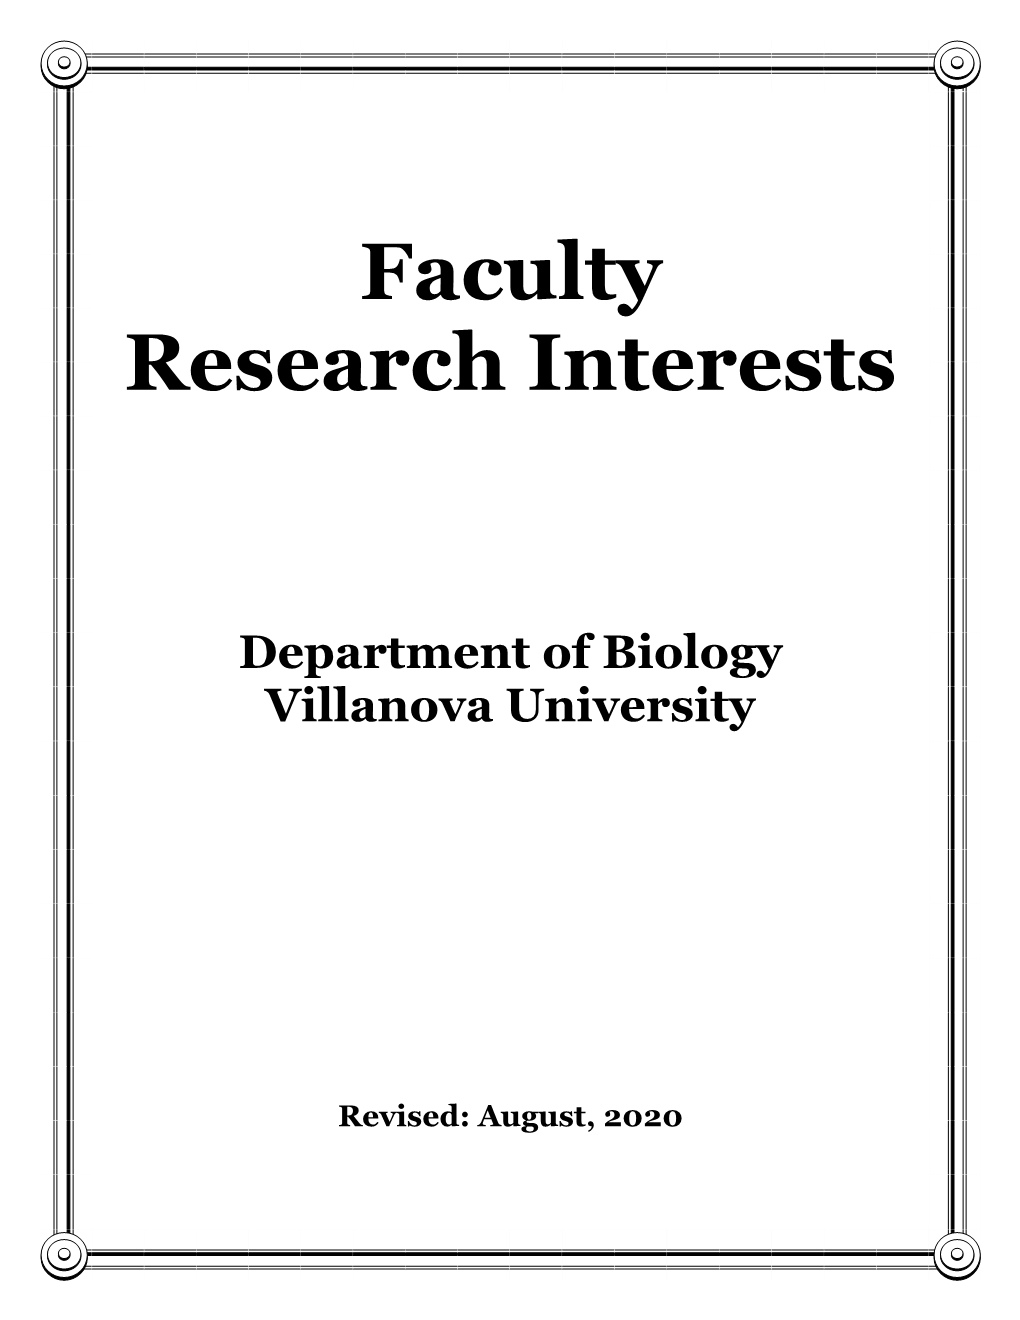 Faculty Research Interest 2020.Pdf